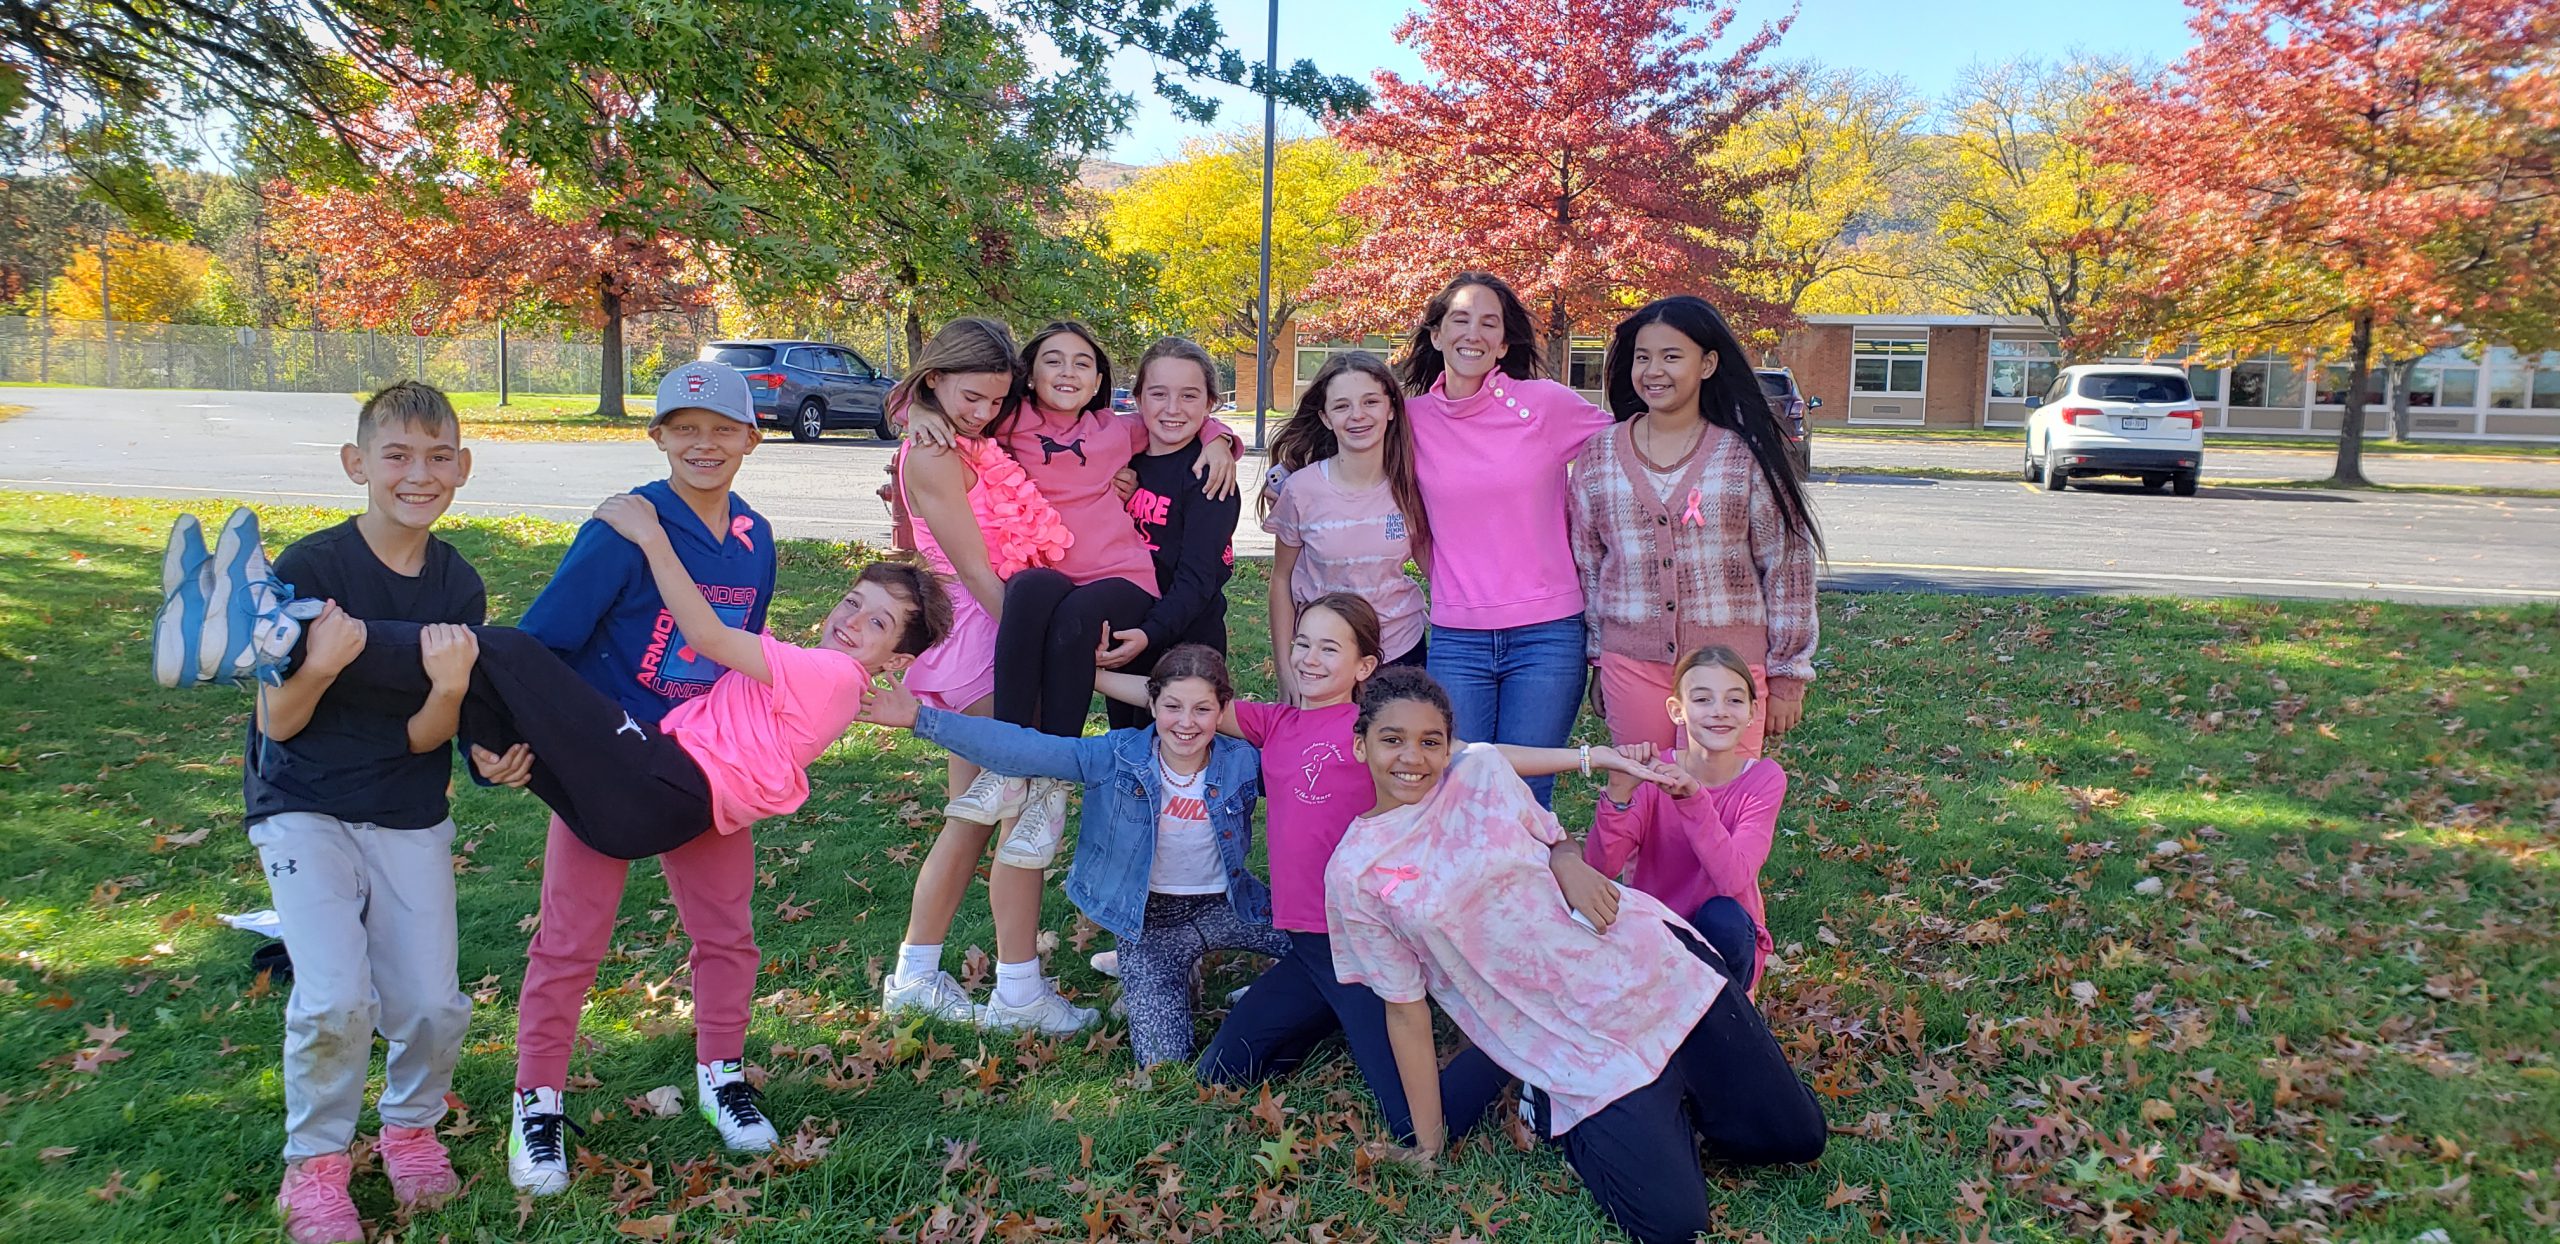 Middle school students dress in pink and pose for a photo to spread awareness for Breast Cancer